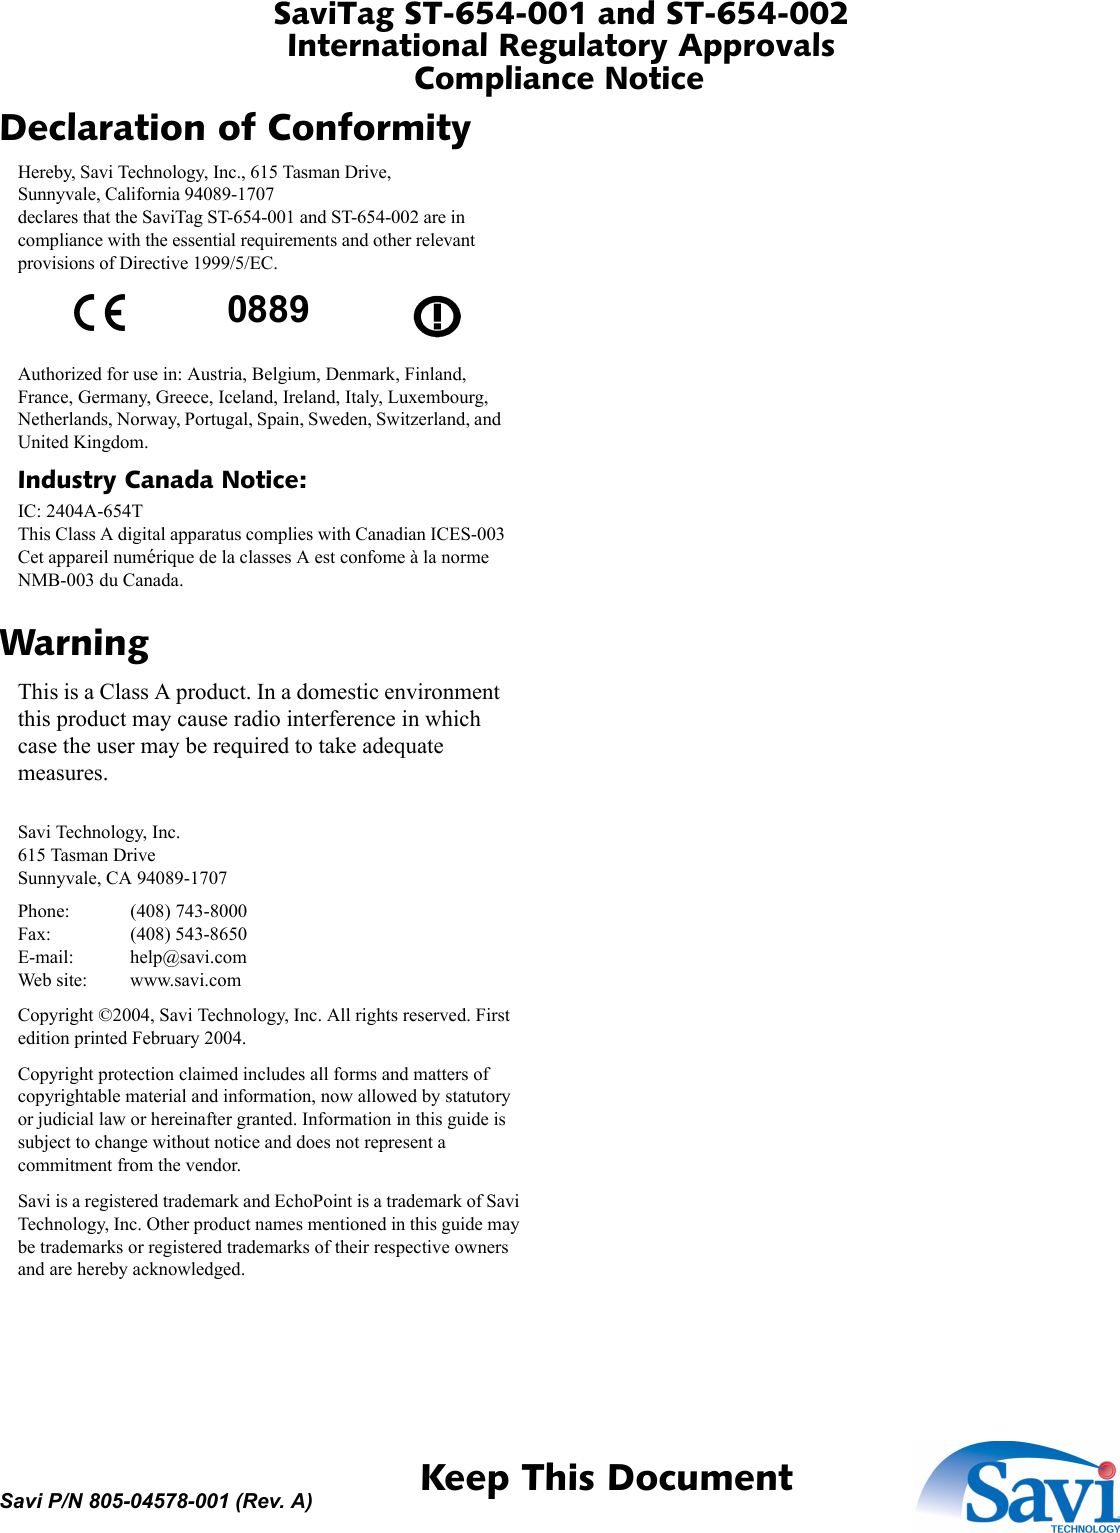 SaviTag ST-654-001 and ST-654-002International Regulatory ApprovalsCompliance Notice 1  Keep This DocumentSavi P/N 805-04578-001 (Rev. A)Declaration of ConformityHereby, Savi Technology, Inc., 615 Tasman Drive, Sunnyvale, California 94089-1707 declares that the SaviTag ST-654-001 and ST-654-002 are in compliance with the essential requirements and other relevant provisions of Directive 1999/5/EC.Authorized for use in: Austria, Belgium, Denmark, Finland, France, Germany, Greece, Iceland, Ireland, Italy, Luxembourg, Netherlands, Norway, Portugal, Spain, Sweden, Switzerland, and United Kingdom.Industry Canada Notice:IC: 2404A-654T This Class A digital apparatus complies with Canadian ICES-003 Cet appareil numérique de la classes A est confome à la norme NMB-003 du Canada.WarningThis is a Class A product. In a domestic environment this product may cause radio interference in which case the user may be required to take adequate measures.Savi Technology, Inc. 615 Tasman Drive Sunnyvale, CA 94089-1707Phone: (408) 743-8000 Fax: (408) 543-8650 E-mail: help@savi.com Web site: www.savi.comCopyright ©2004, Savi Technology, Inc. All rights reserved. First edition printed February 2004.Copyright protection claimed includes all forms and matters of copyrightable material and information, now allowed by statutory or judicial law or hereinafter granted. Information in this guide is subject to change without notice and does not represent a commitment from the vendor.Savi is a registered trademark and EchoPoint is a trademark of Savi Technology, Inc. Other product names mentioned in this guide may be trademarks or registered trademarks of their respective owners and are hereby acknowledged.0889